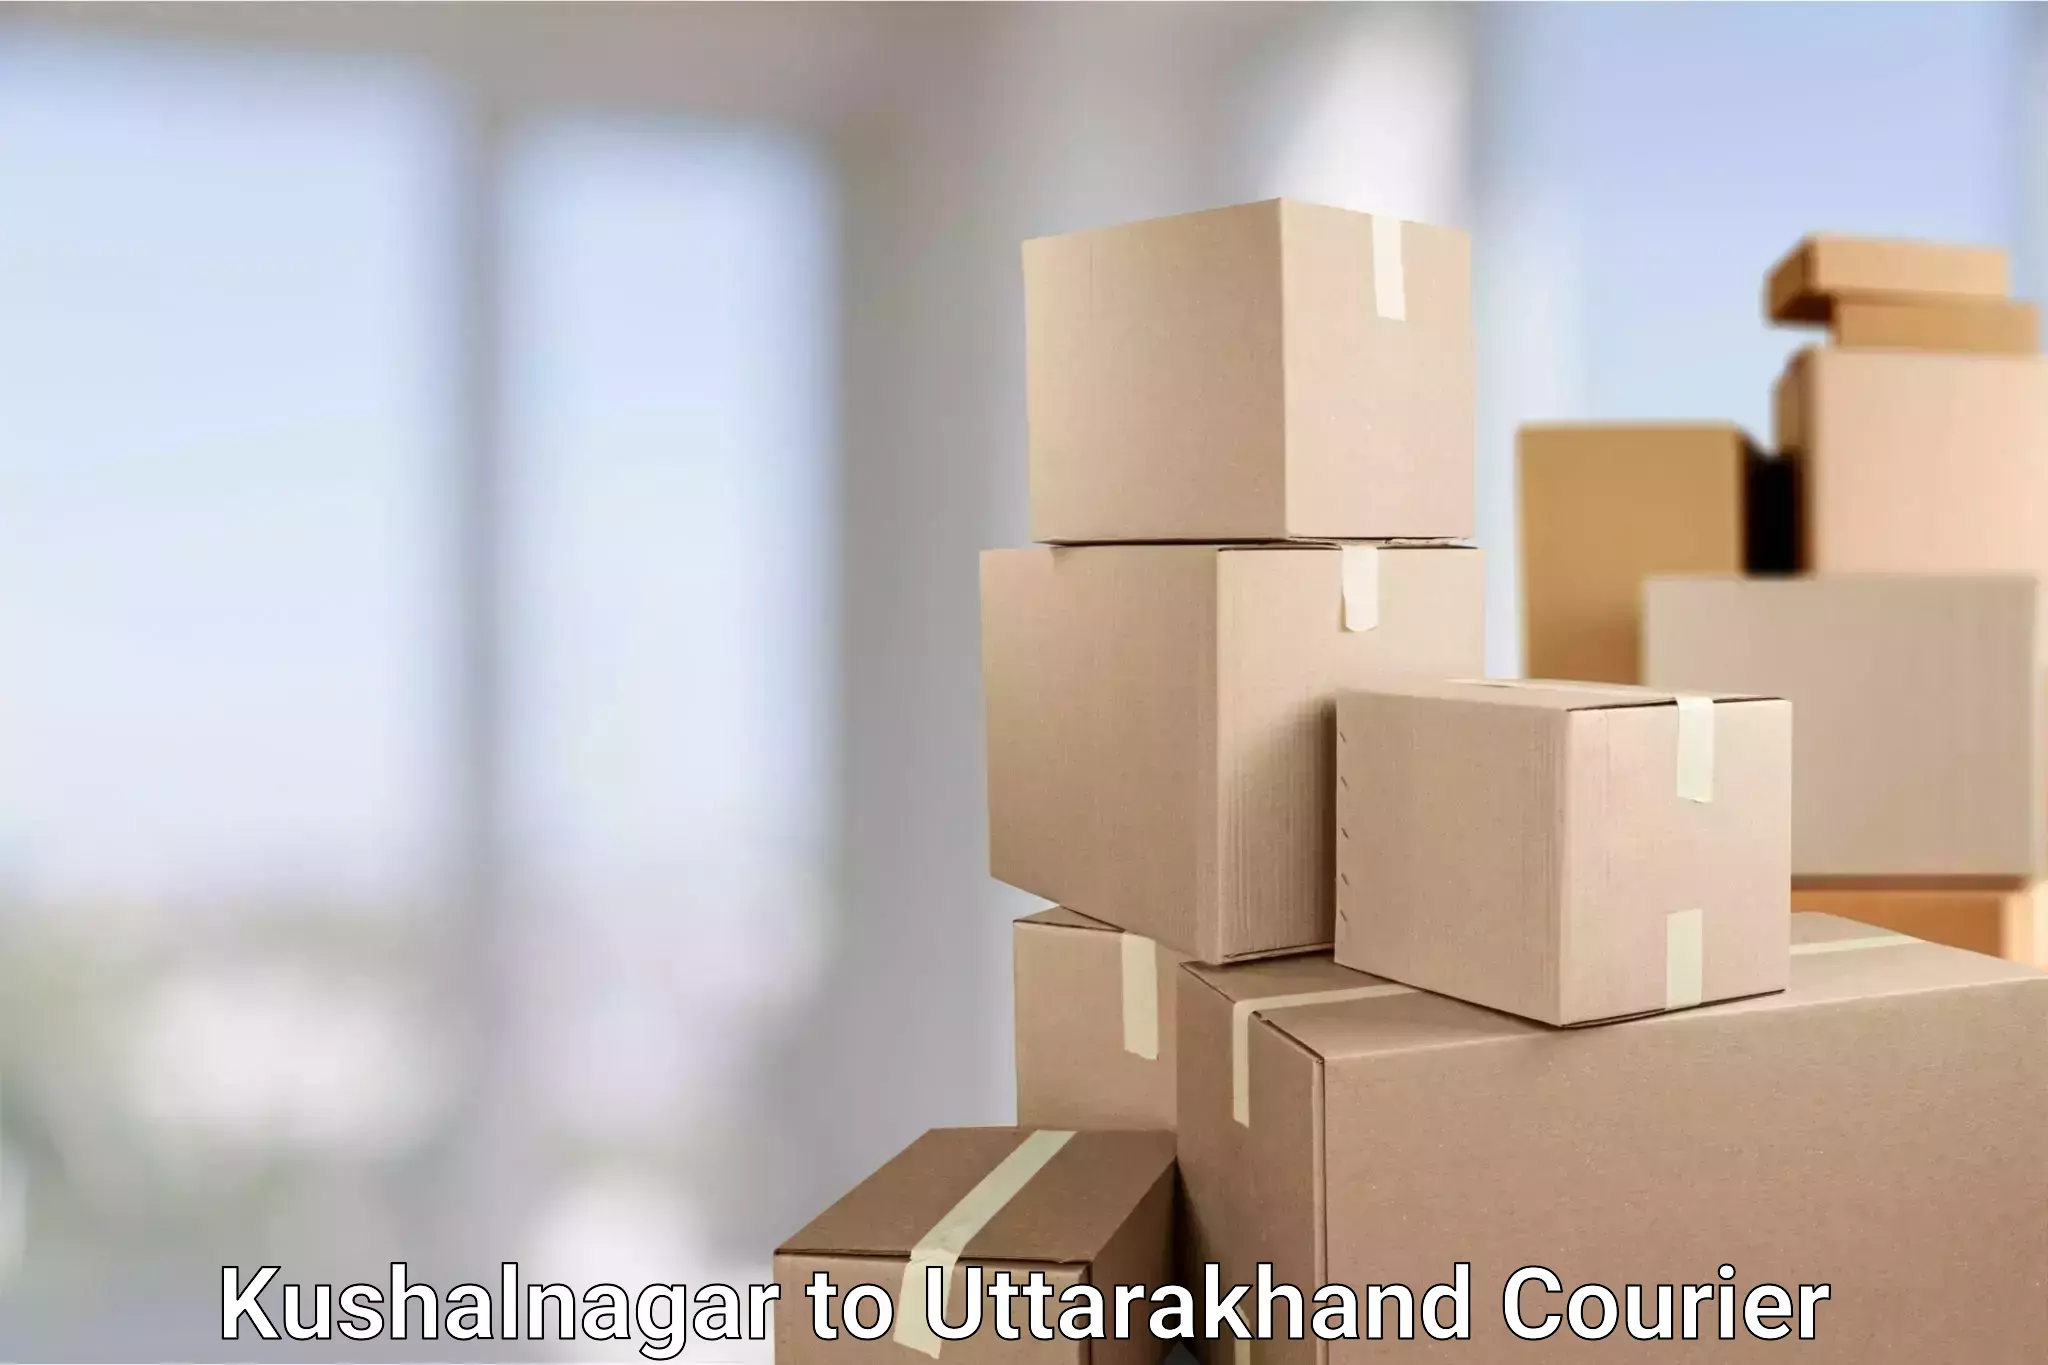 On-call courier service Kushalnagar to Roorkee